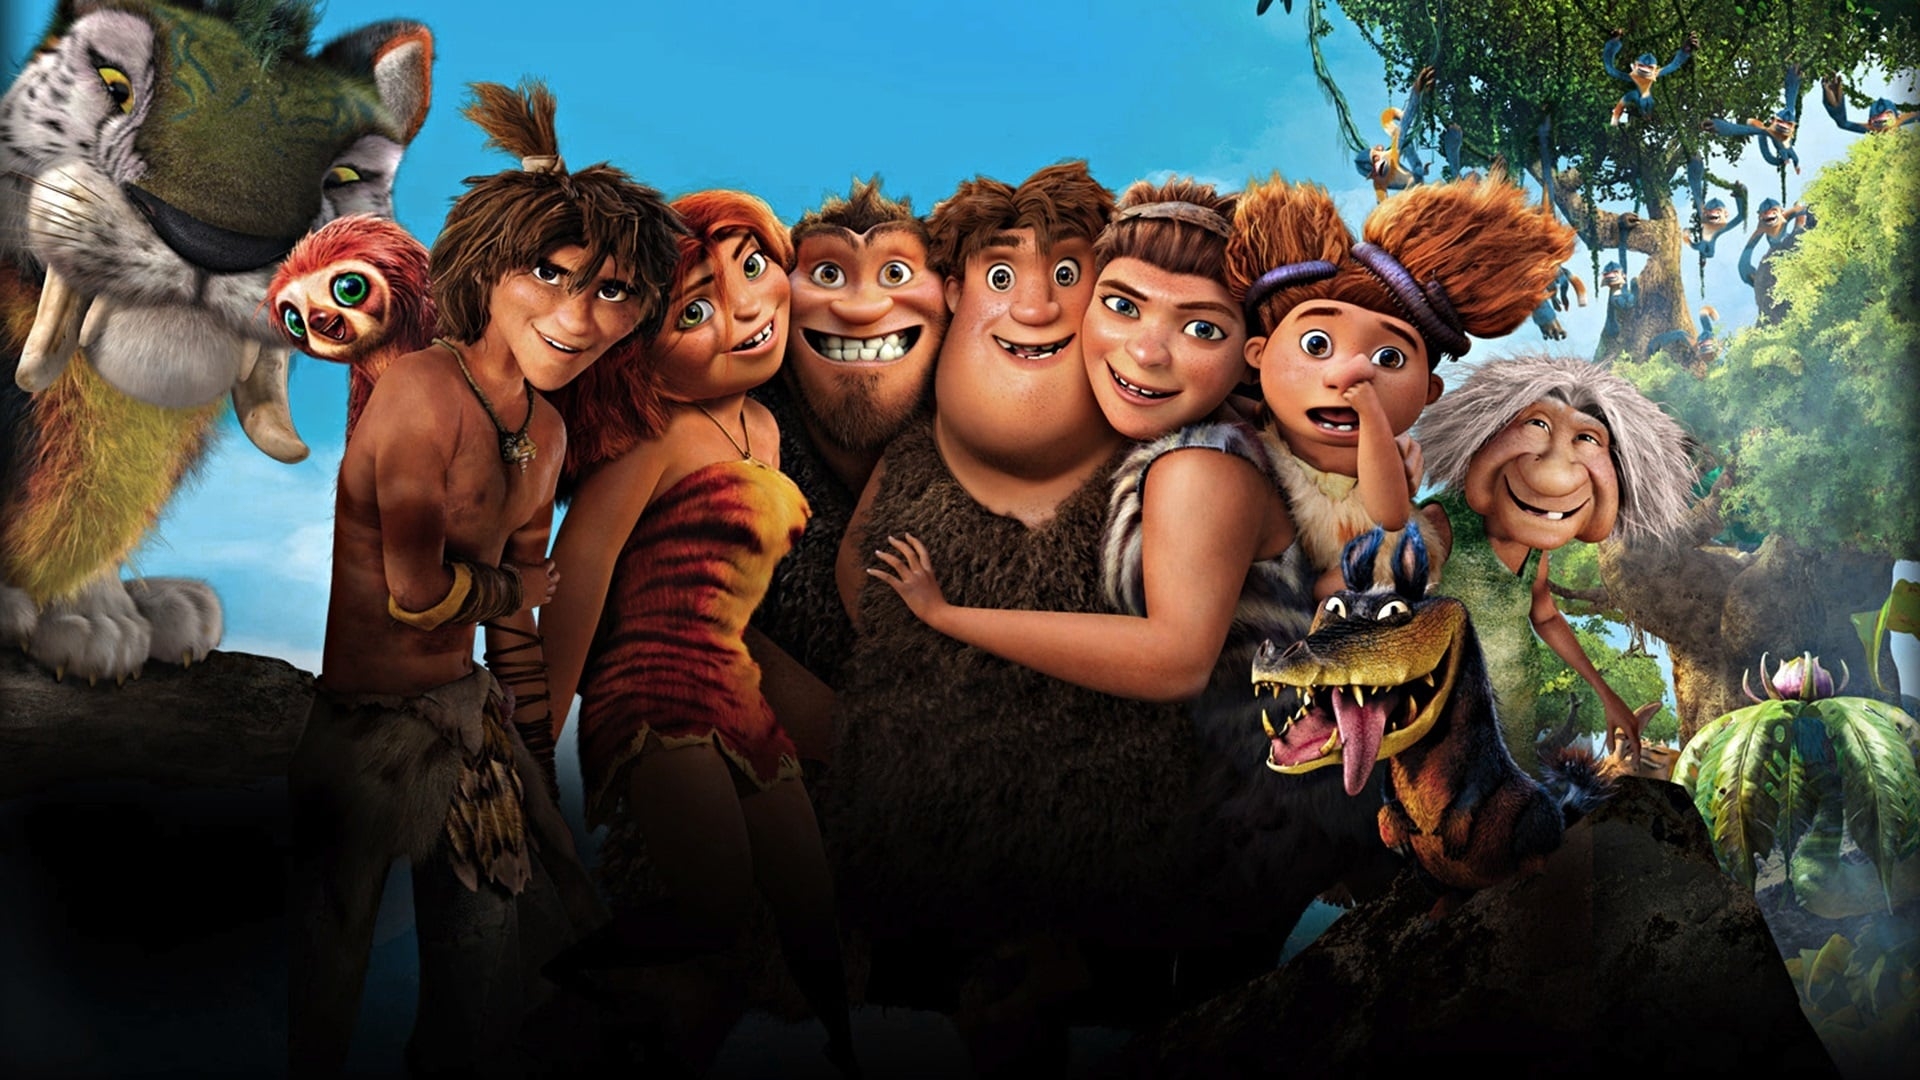 The Croods (The Croods)